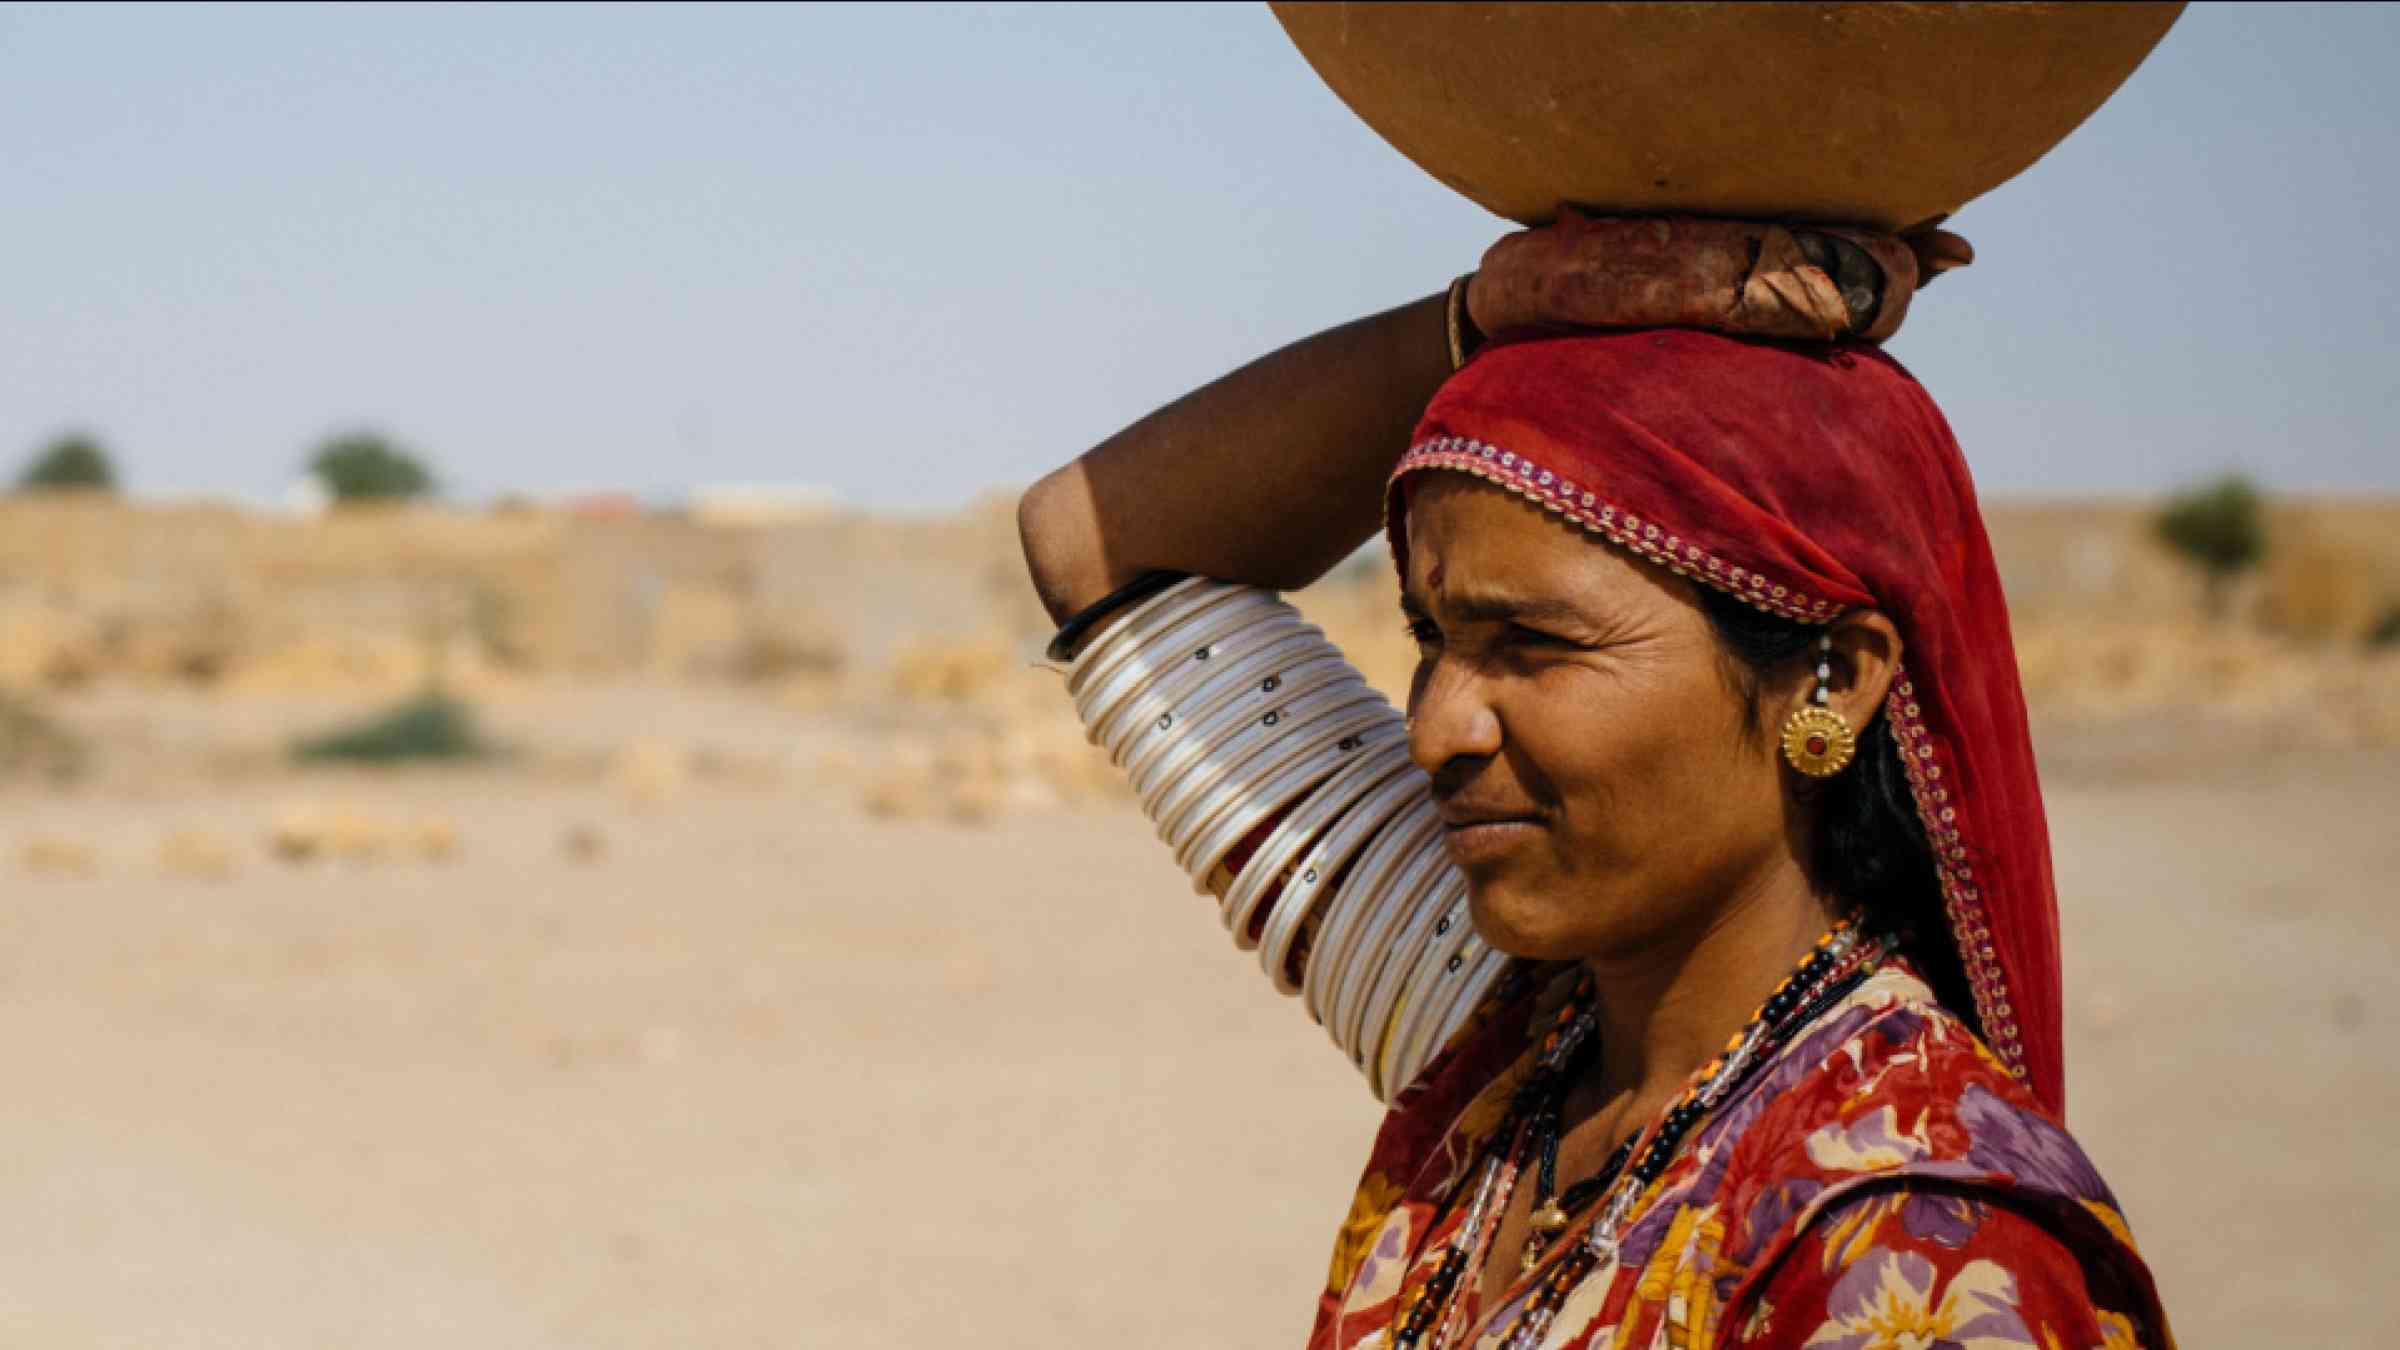 Indian woman holding a water recipient on her head in the desert